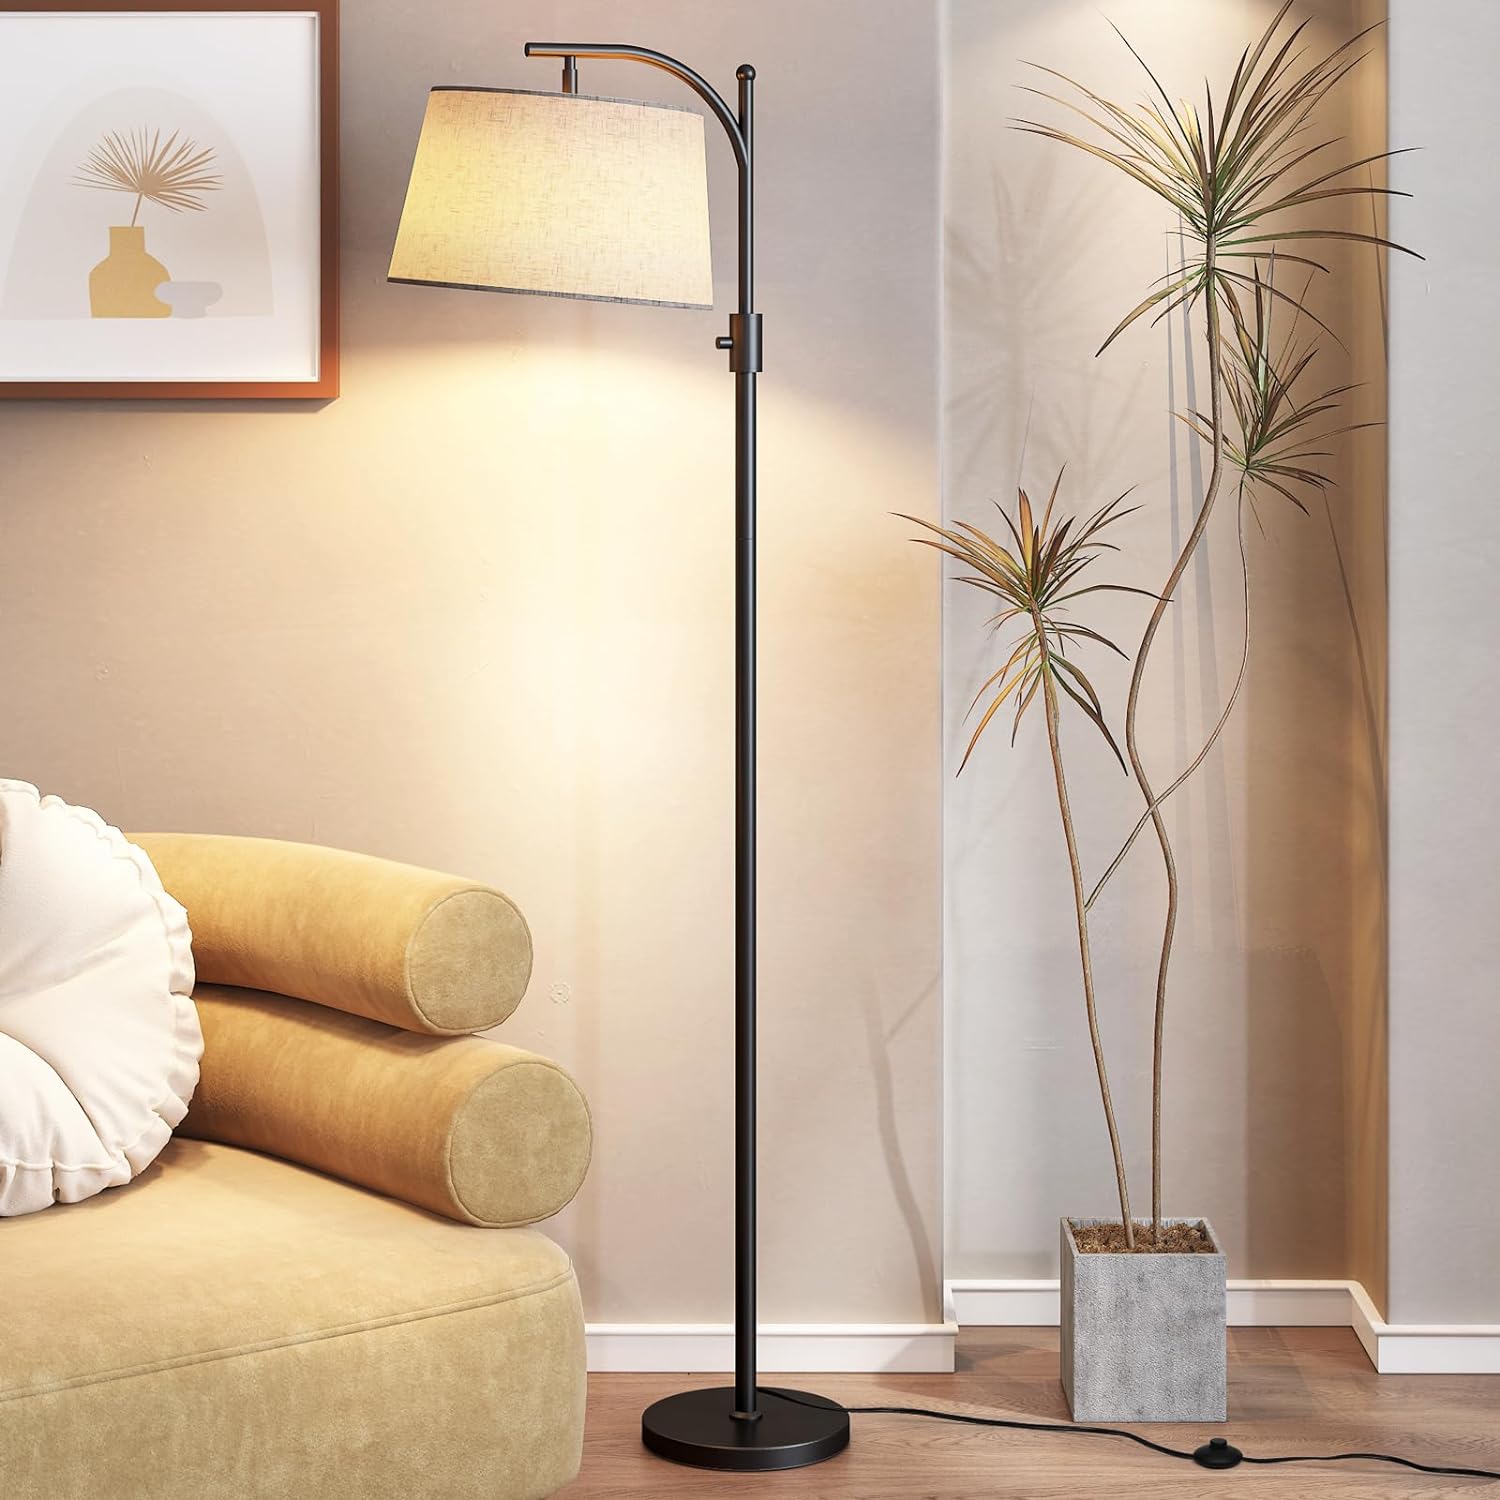 ANJIME Floor Lamp for Living Room,Classic Standing Lamp with Textured Linen Shade,Tall Floor Lamp for Living Room,Bedroom,Office,Reading,9W LED Bulb Included